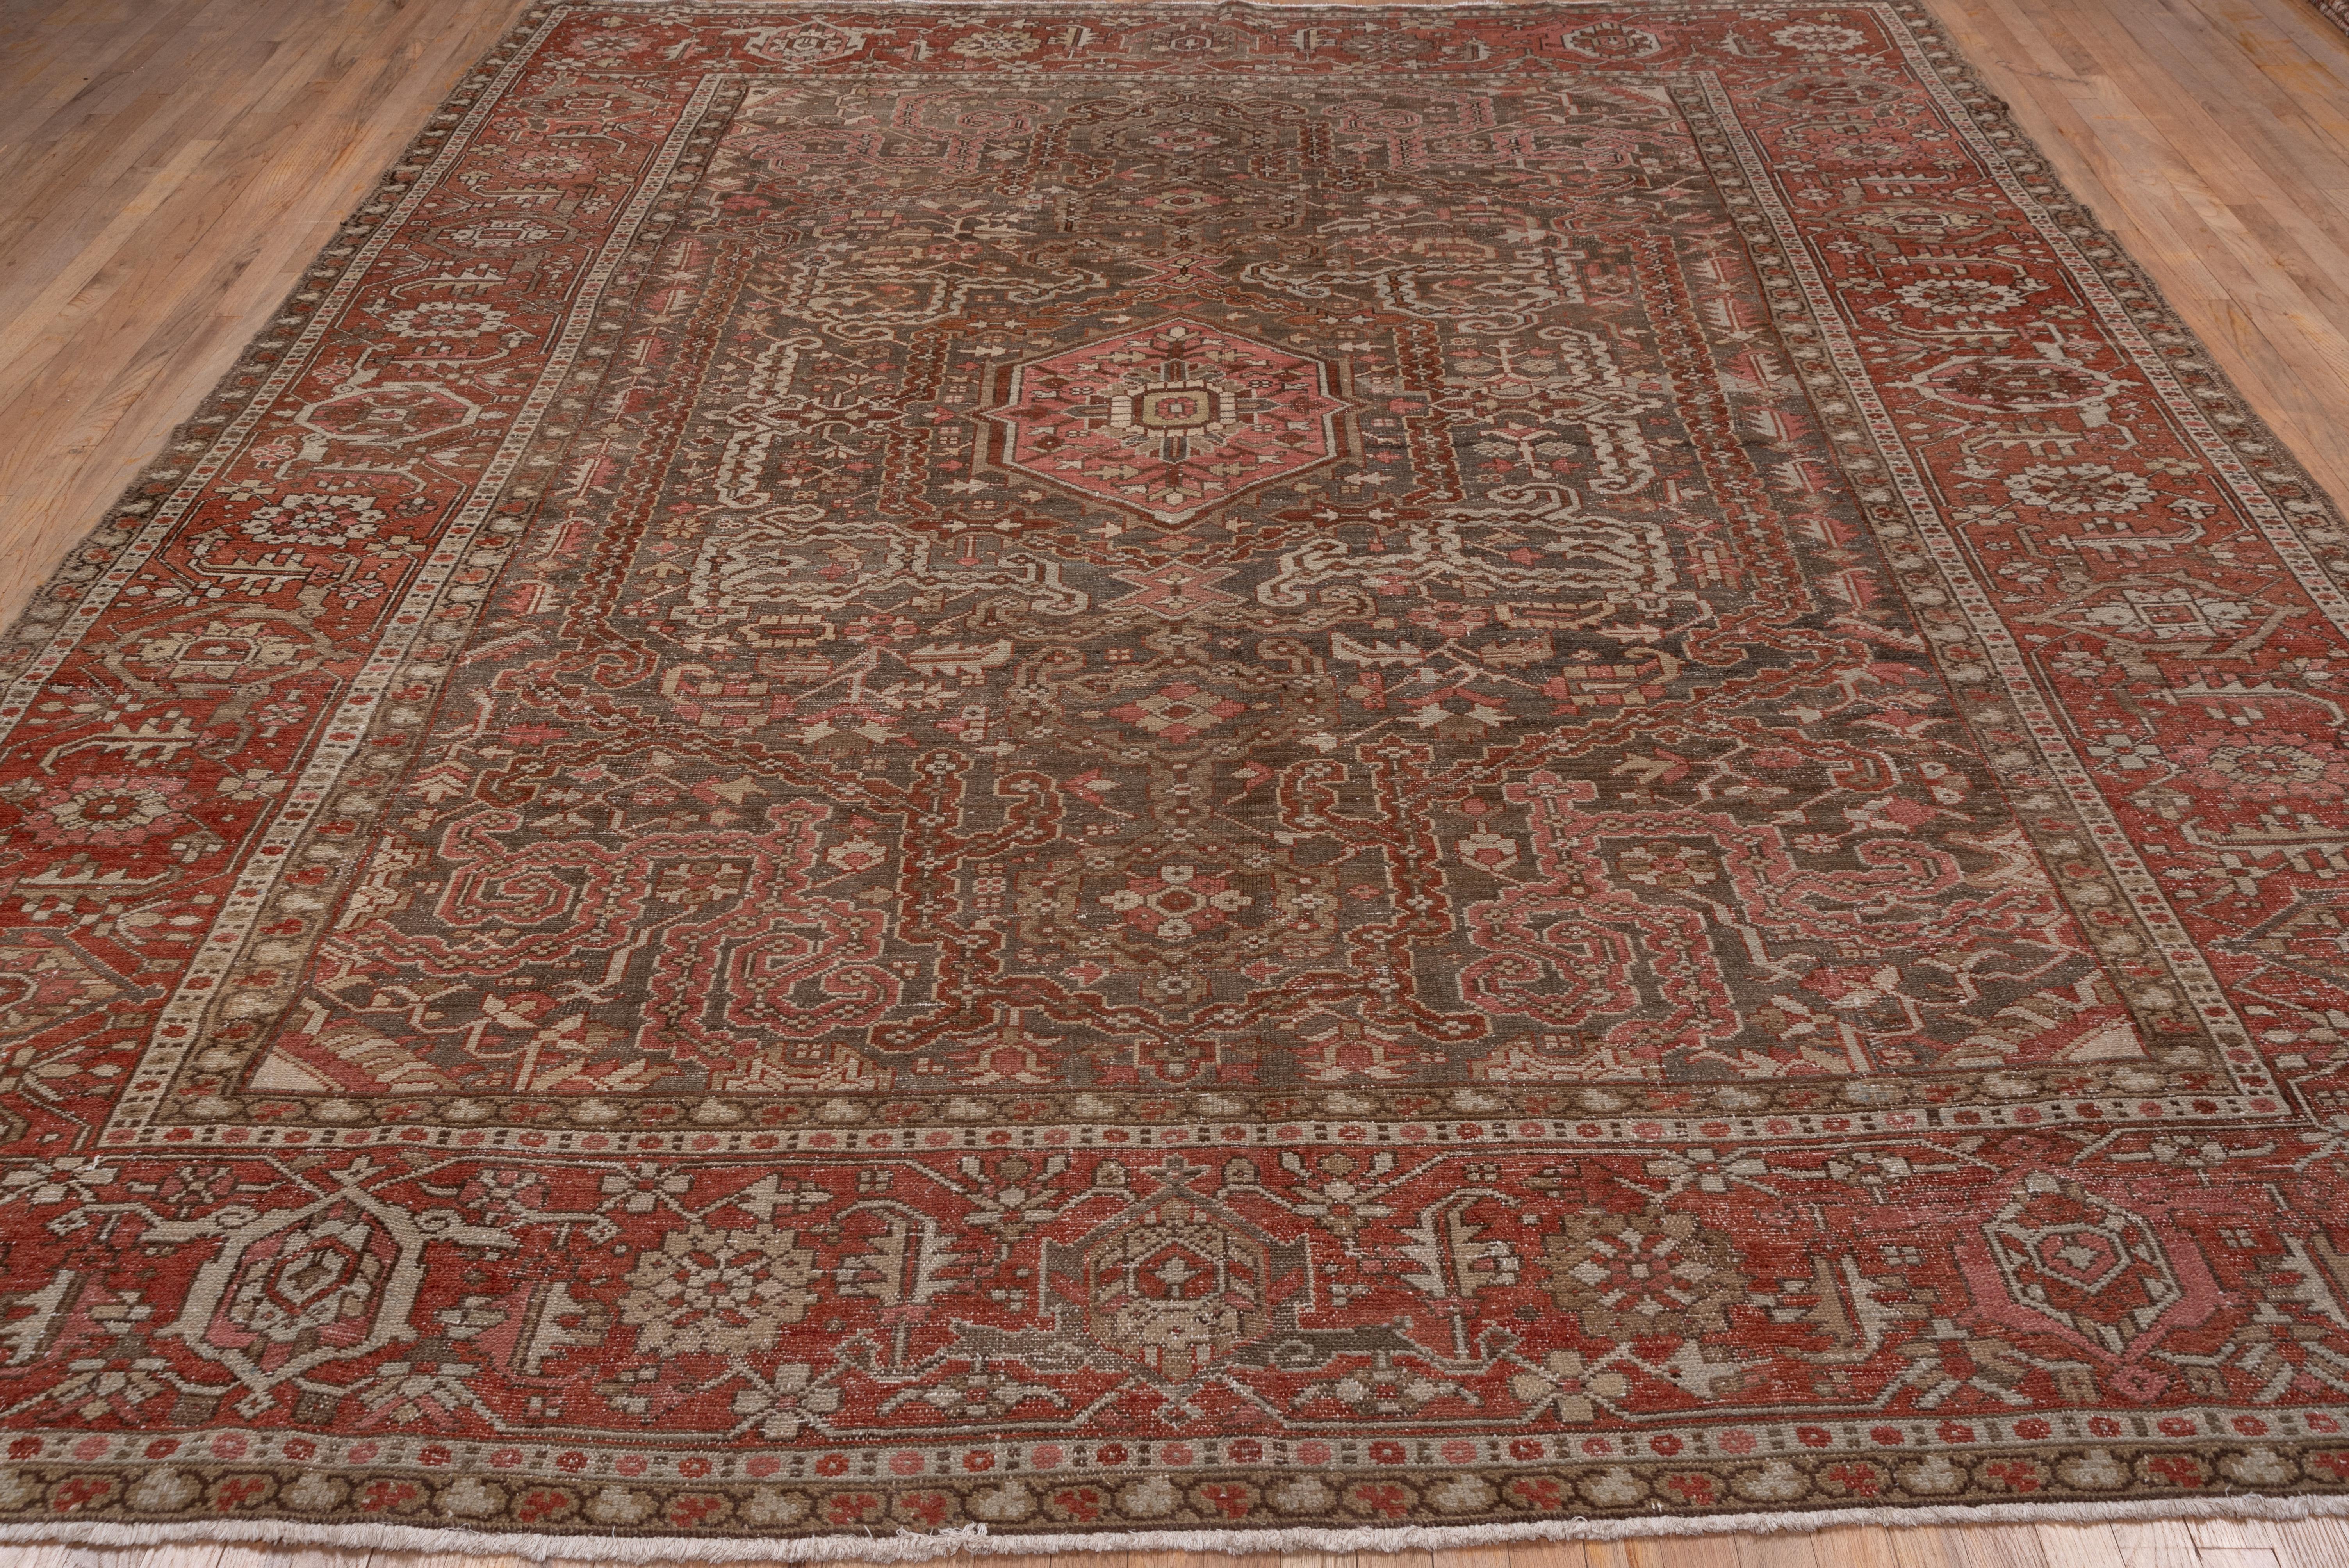 Stunning Antique Persian Serapi Arae Rug, Charcoal Gray Field & Rust Borders In Good Condition For Sale In New York, NY